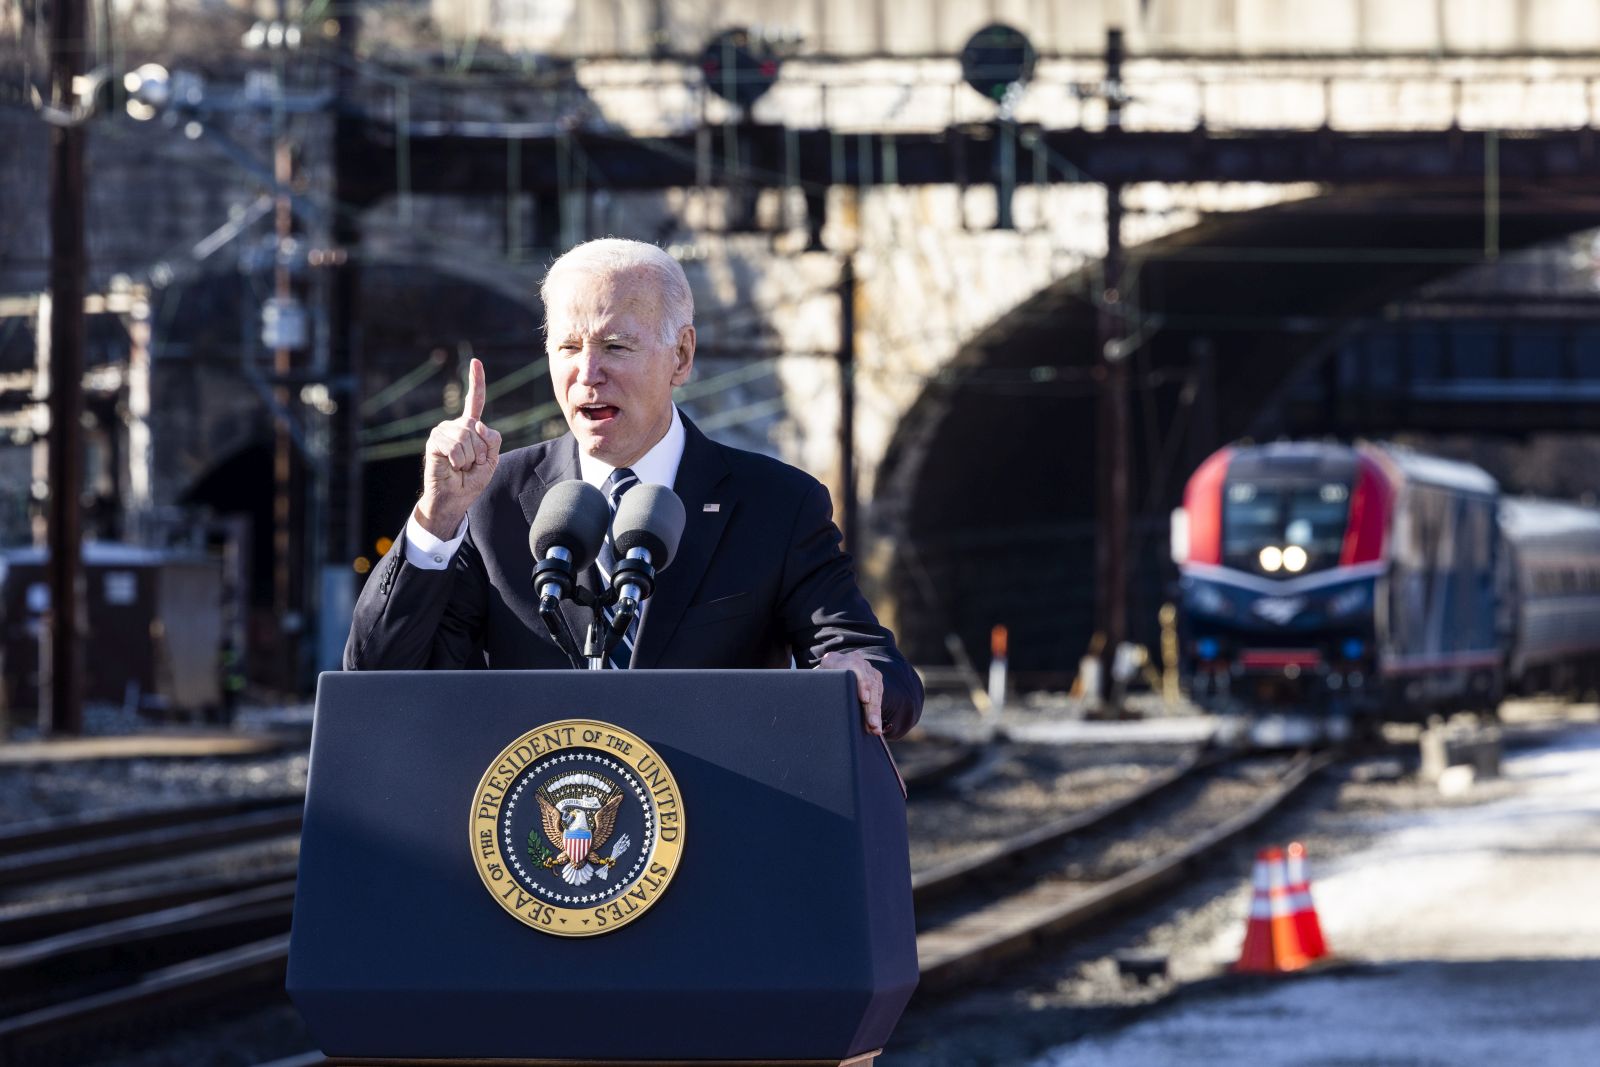 epa10440479 US president Joe Biden speaks about the infrastructure bill next to Amtrak's 150-year old Baltimore and Potomac Tunnel in Baltimore, Maryland, USA, 30 January 2023. The aging tunnel is reportedly the largest bottleneck for rail commuters on Amtrak's Northeast Corridor.  EPA/JIM LO SCALZO